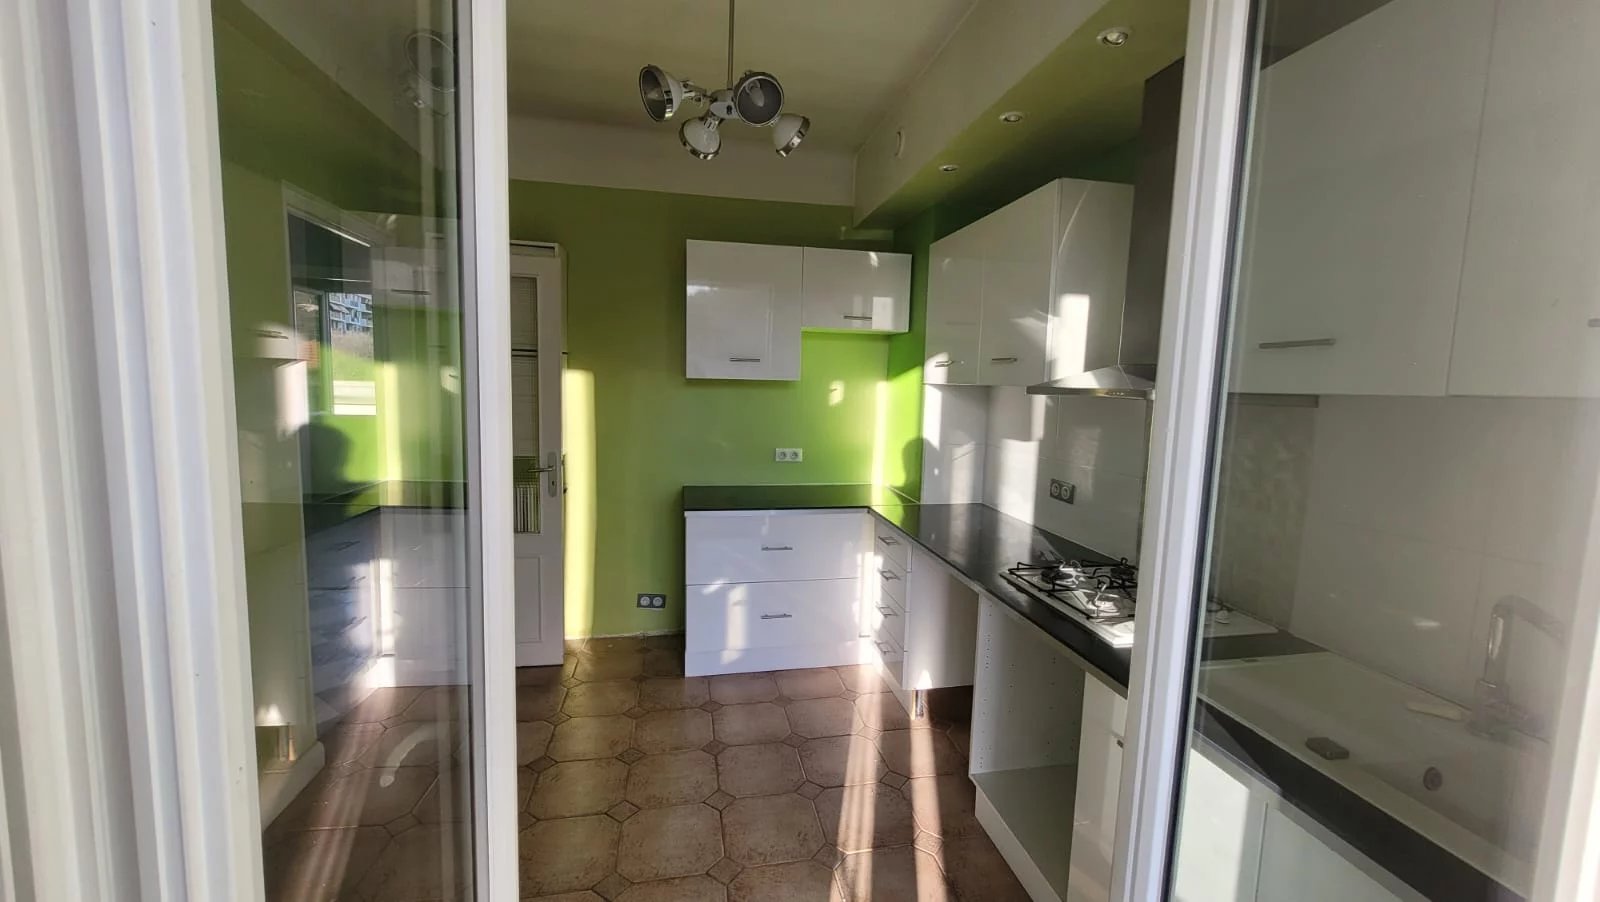 LOCATION ,NICE L'ARIANE , 4 PIECES  , LOYER 950€/MOIS